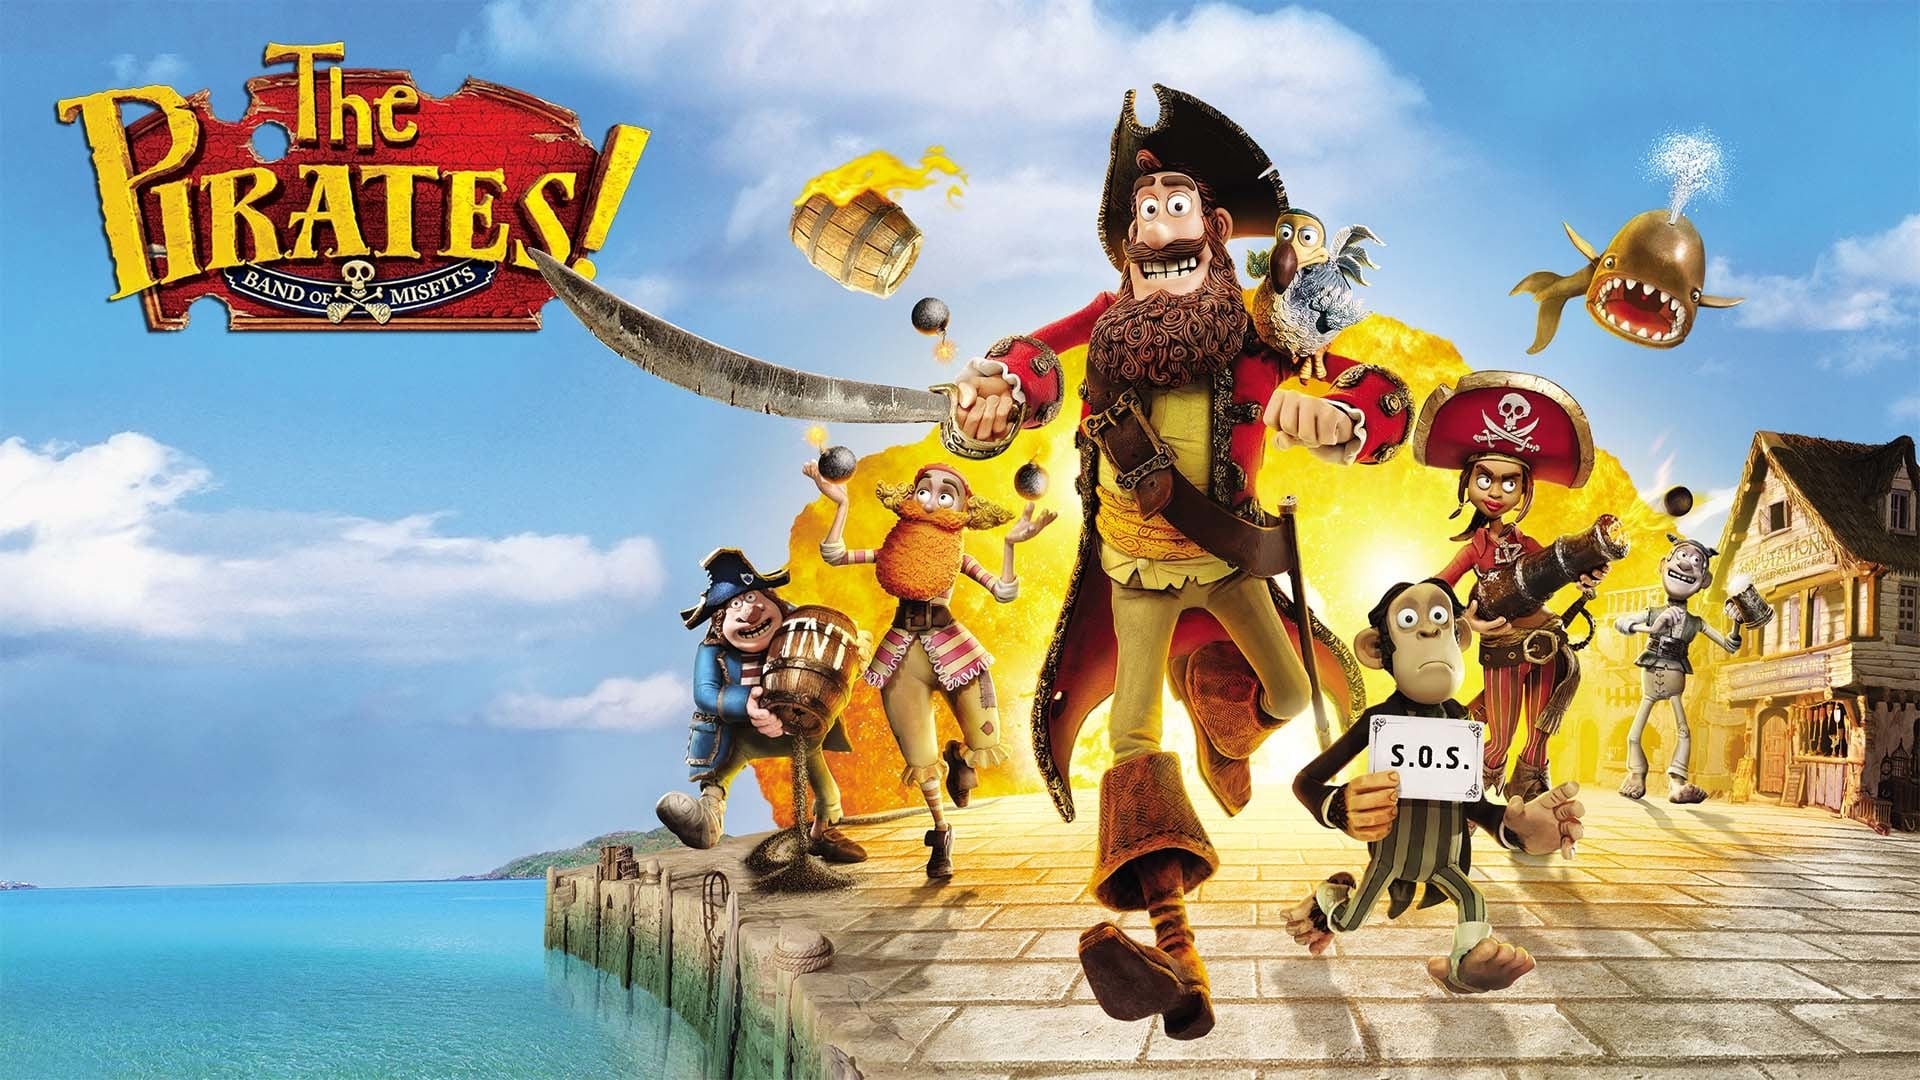 The Pirates! In an Adventure with Scientists!